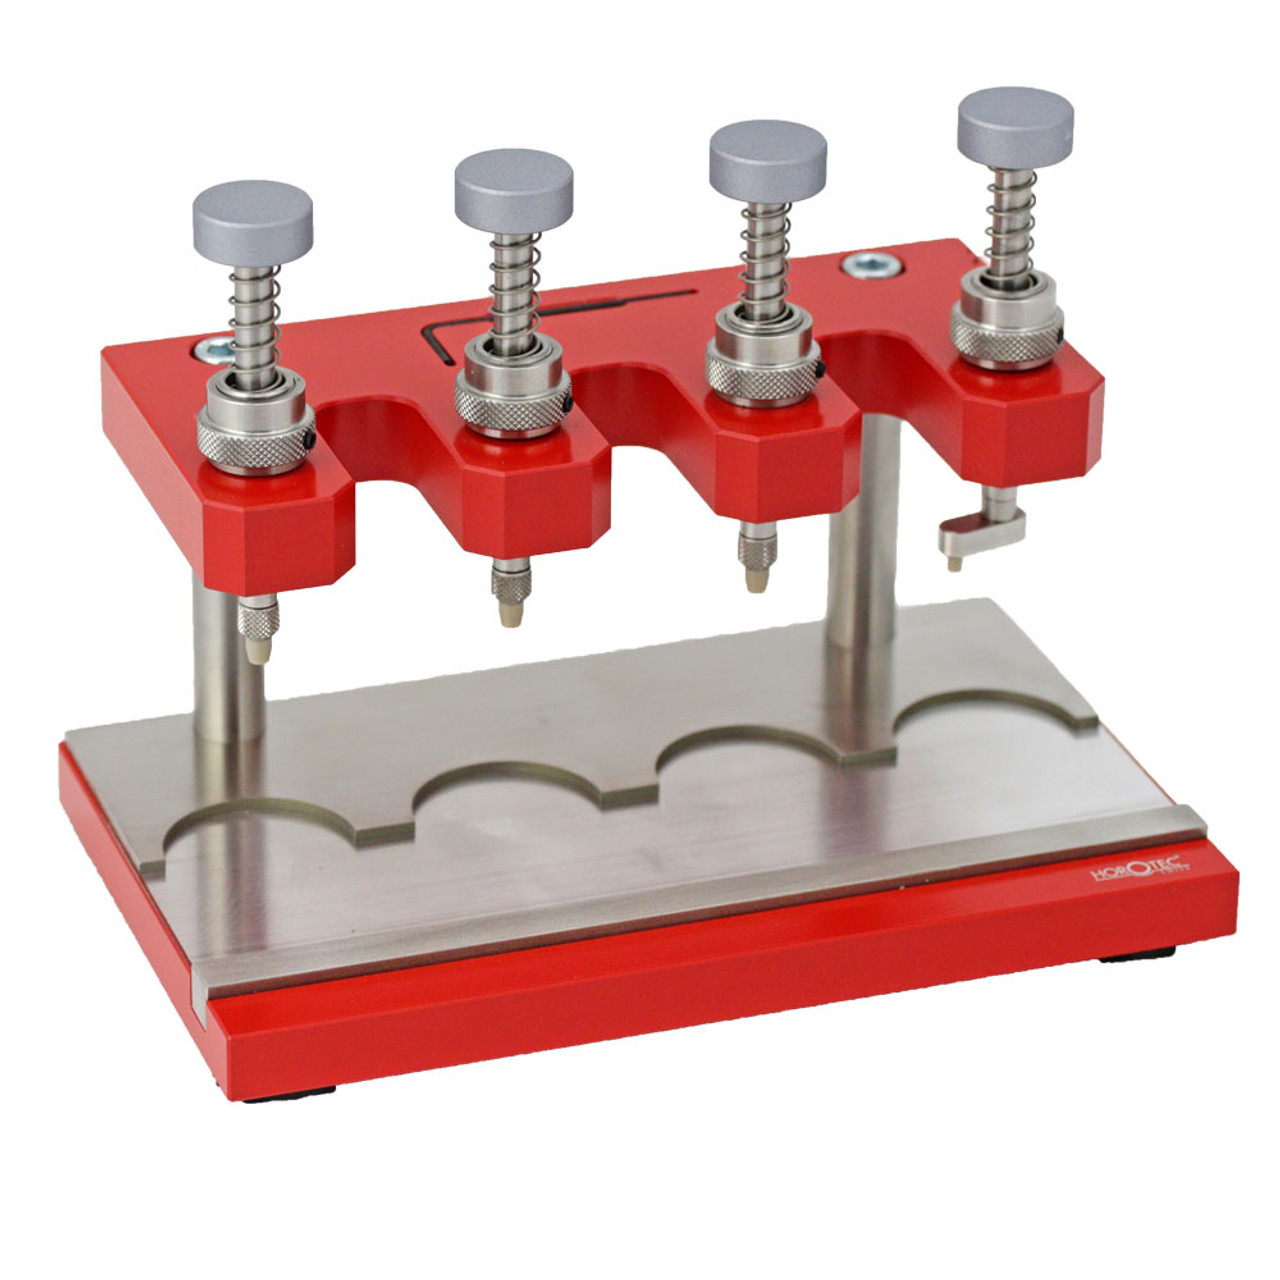 Esslinger Company Horotec Watch Hand Fitting Press with 4 Positions and Peek Tips | Esslinger